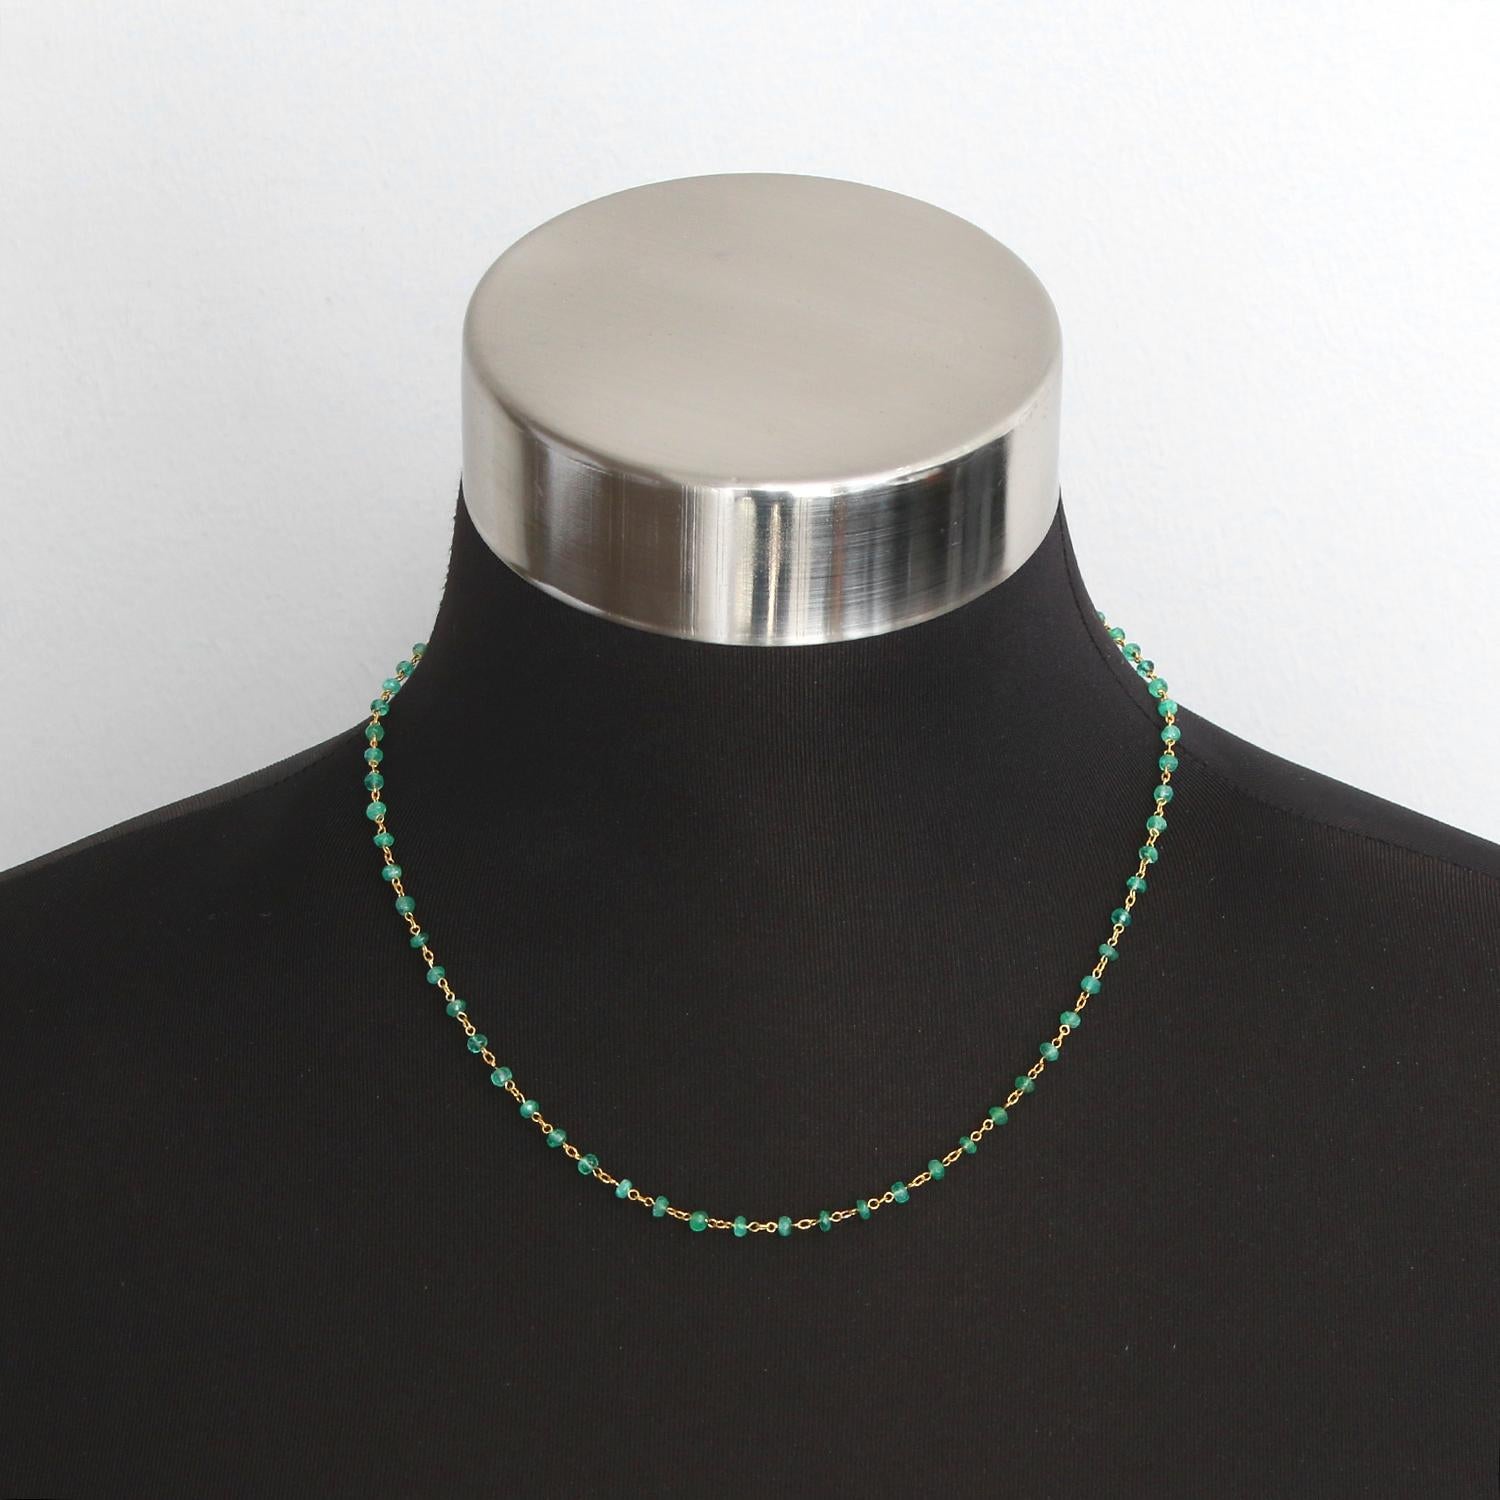 Uncut Emerald and Yellow Gold Necklace - Uncut emeralds on an 18k yellow gold necklace. Each emerald is roughly 3 mm in size. Measuring 17-18 inches long. Total sapphire weight is approx.  New with DeMesy box.